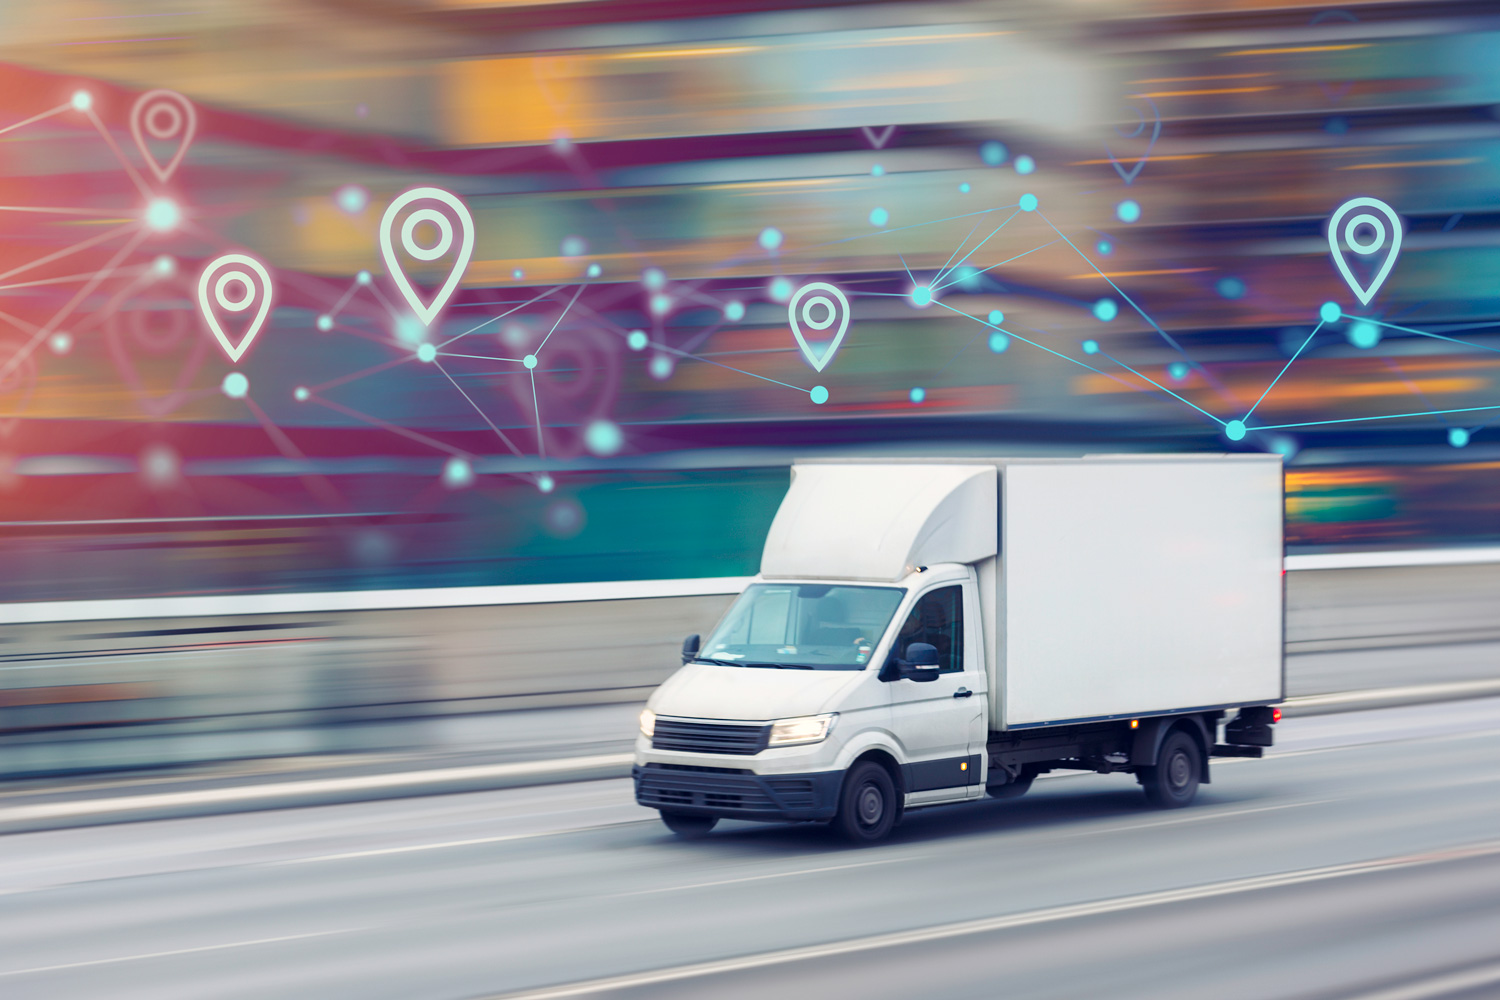 A dispatch and routing platform to improve deliveries MIT News